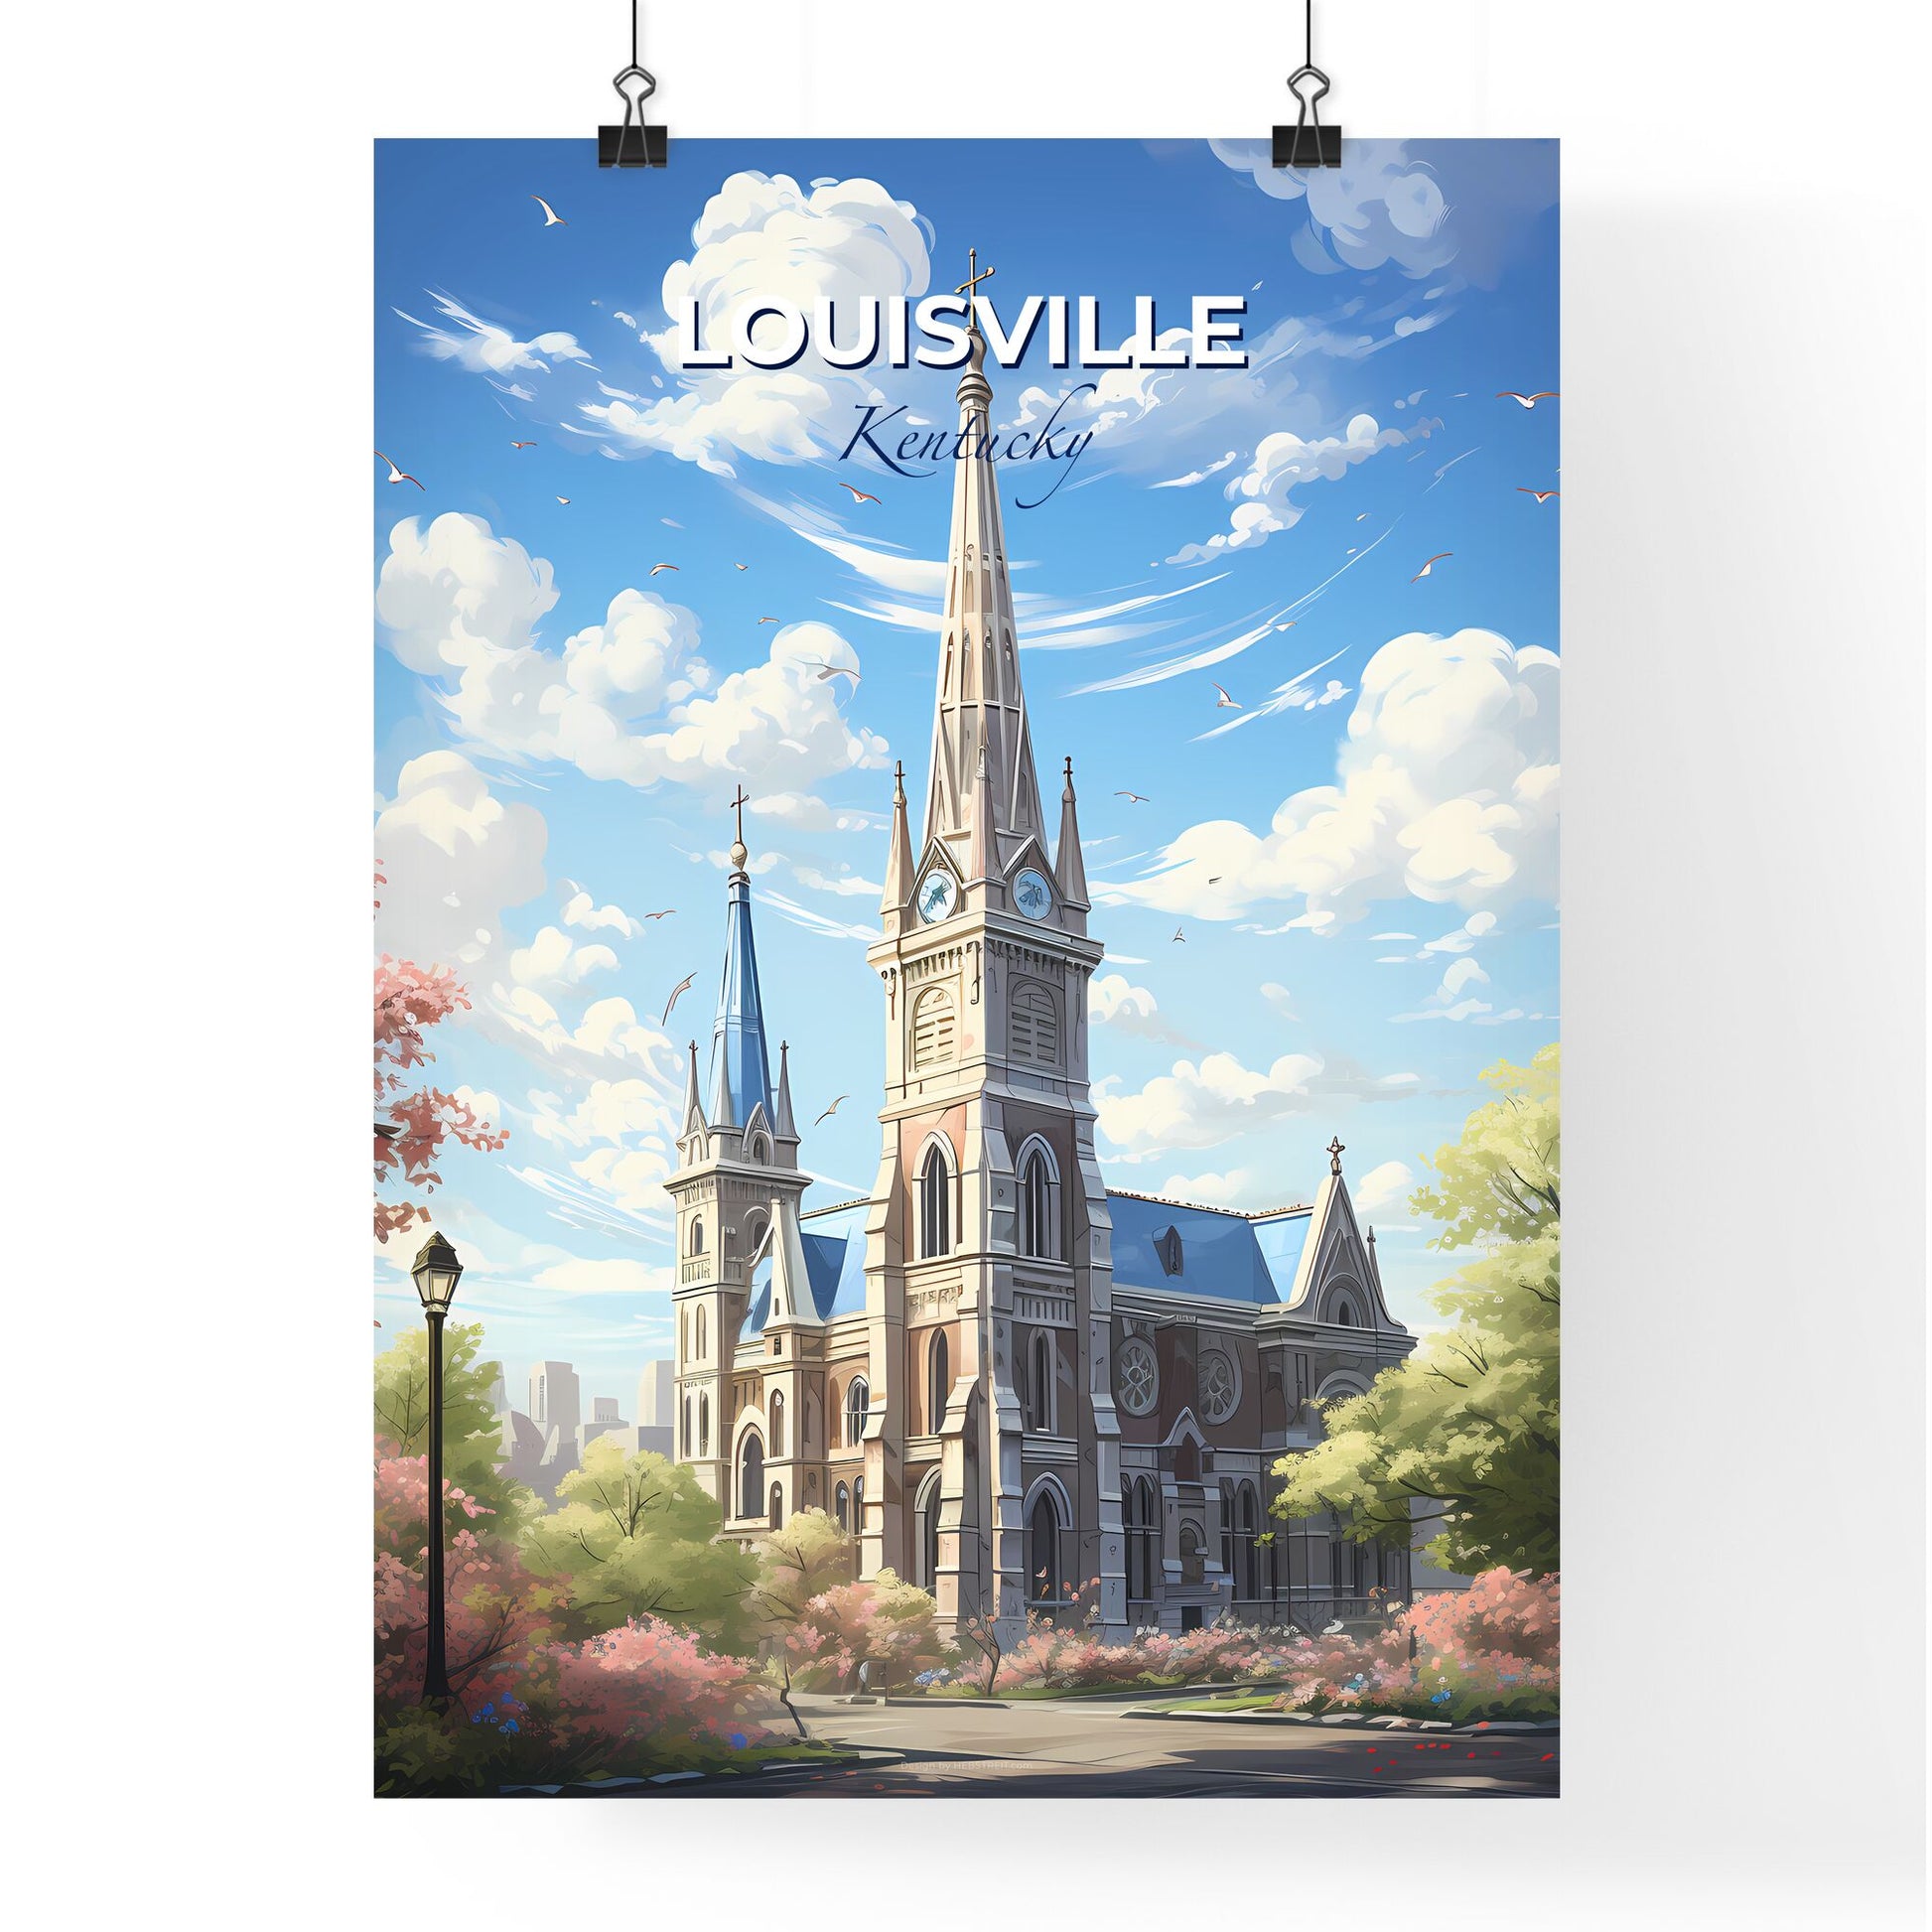 Louisville Kentucky Skyline - A Church With Trees And A Street Light - Customizable Travel Gift Default Title